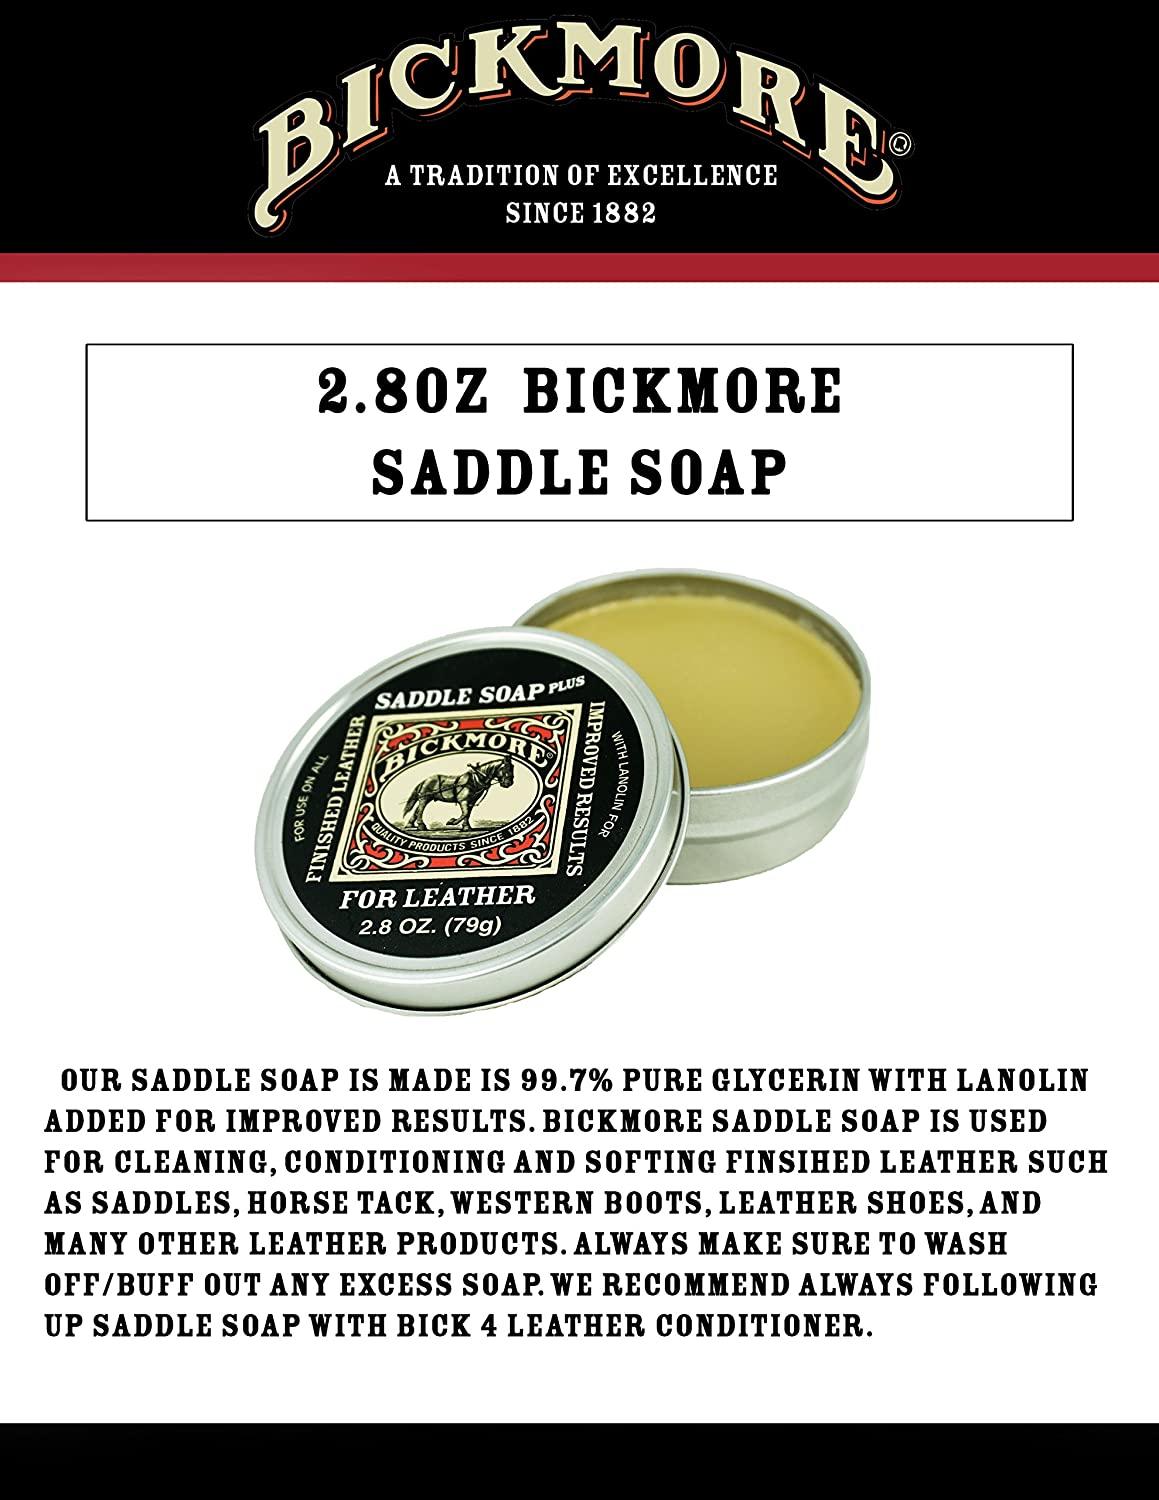 Bickmore Saddle Soap Plus - 2.8oz - Leather Cleaner & Conditioner with  Lanolin - Restorer, Moisturizer, and Protector 2.8 oz